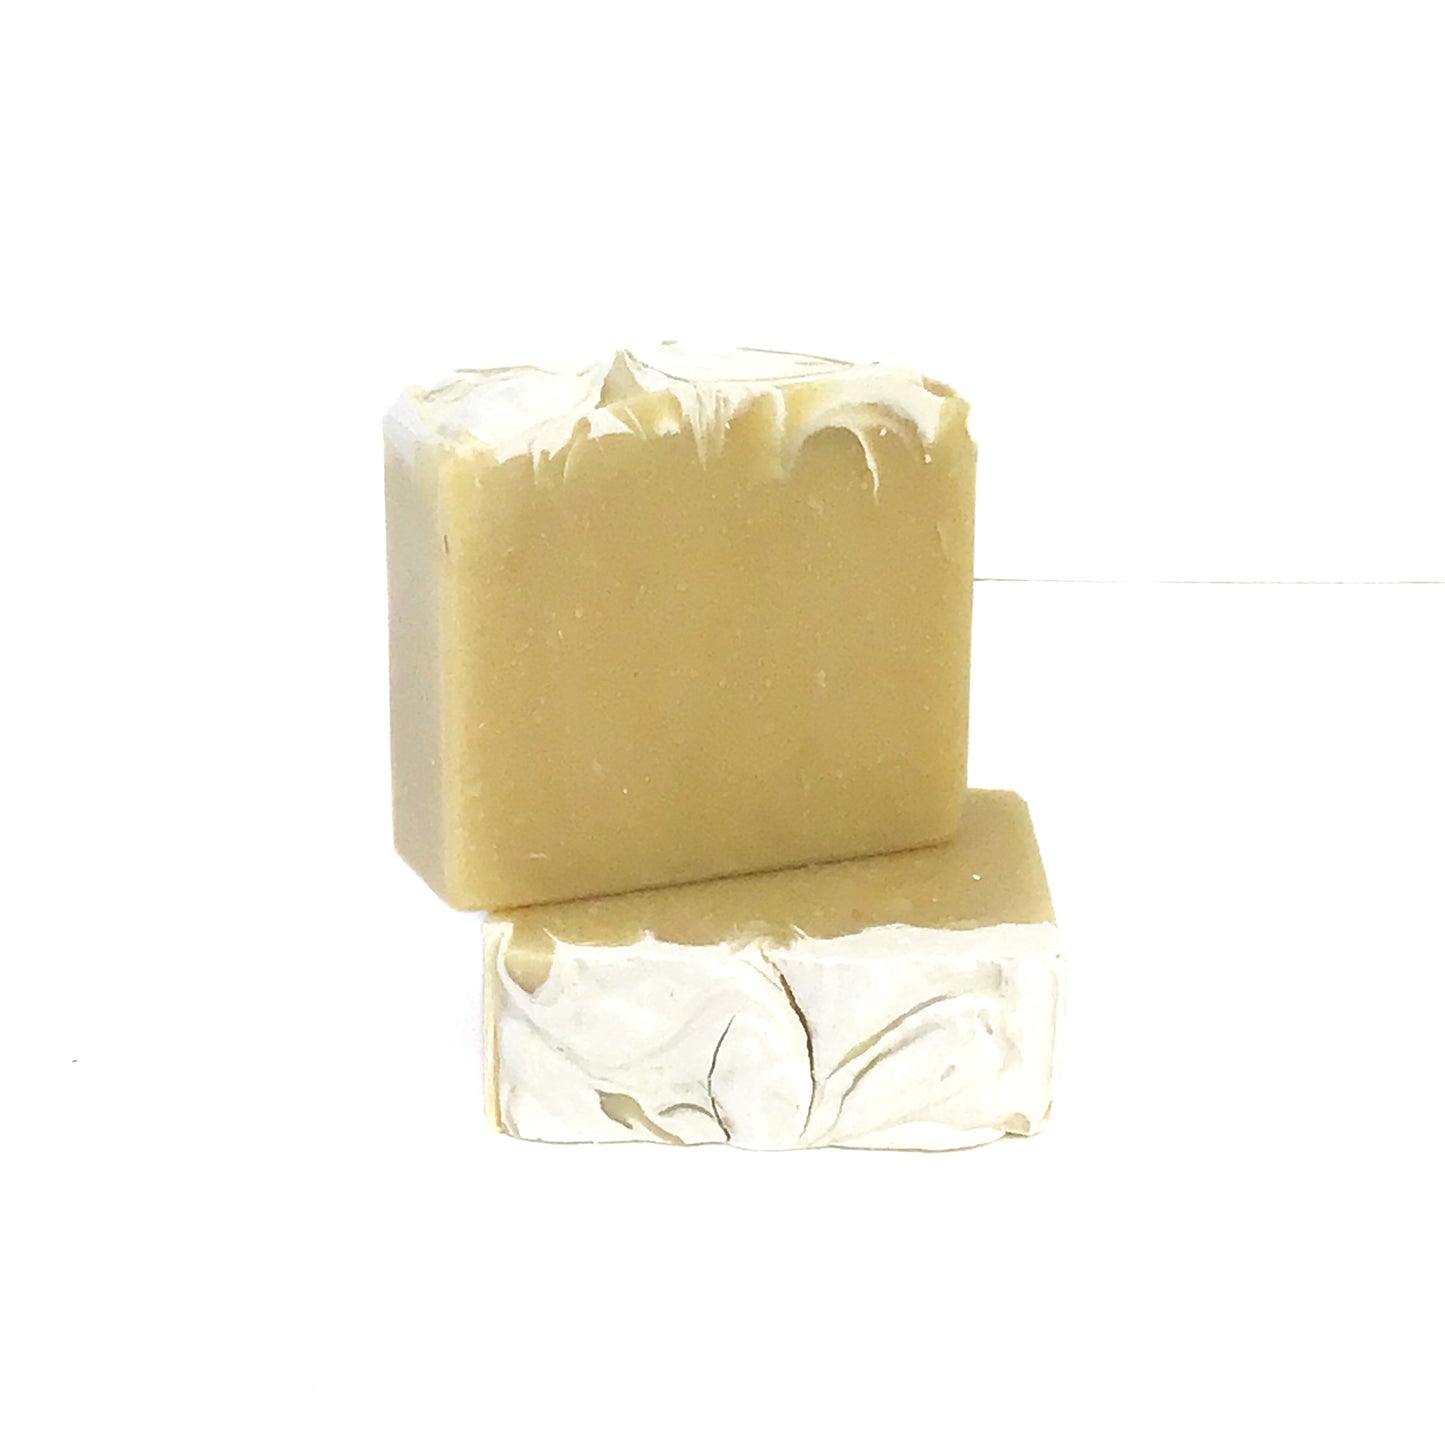 Almond & Honey Soap Bar - Calming and Relaxing Soap - Improve Skin Tone - Soothes irritated skin